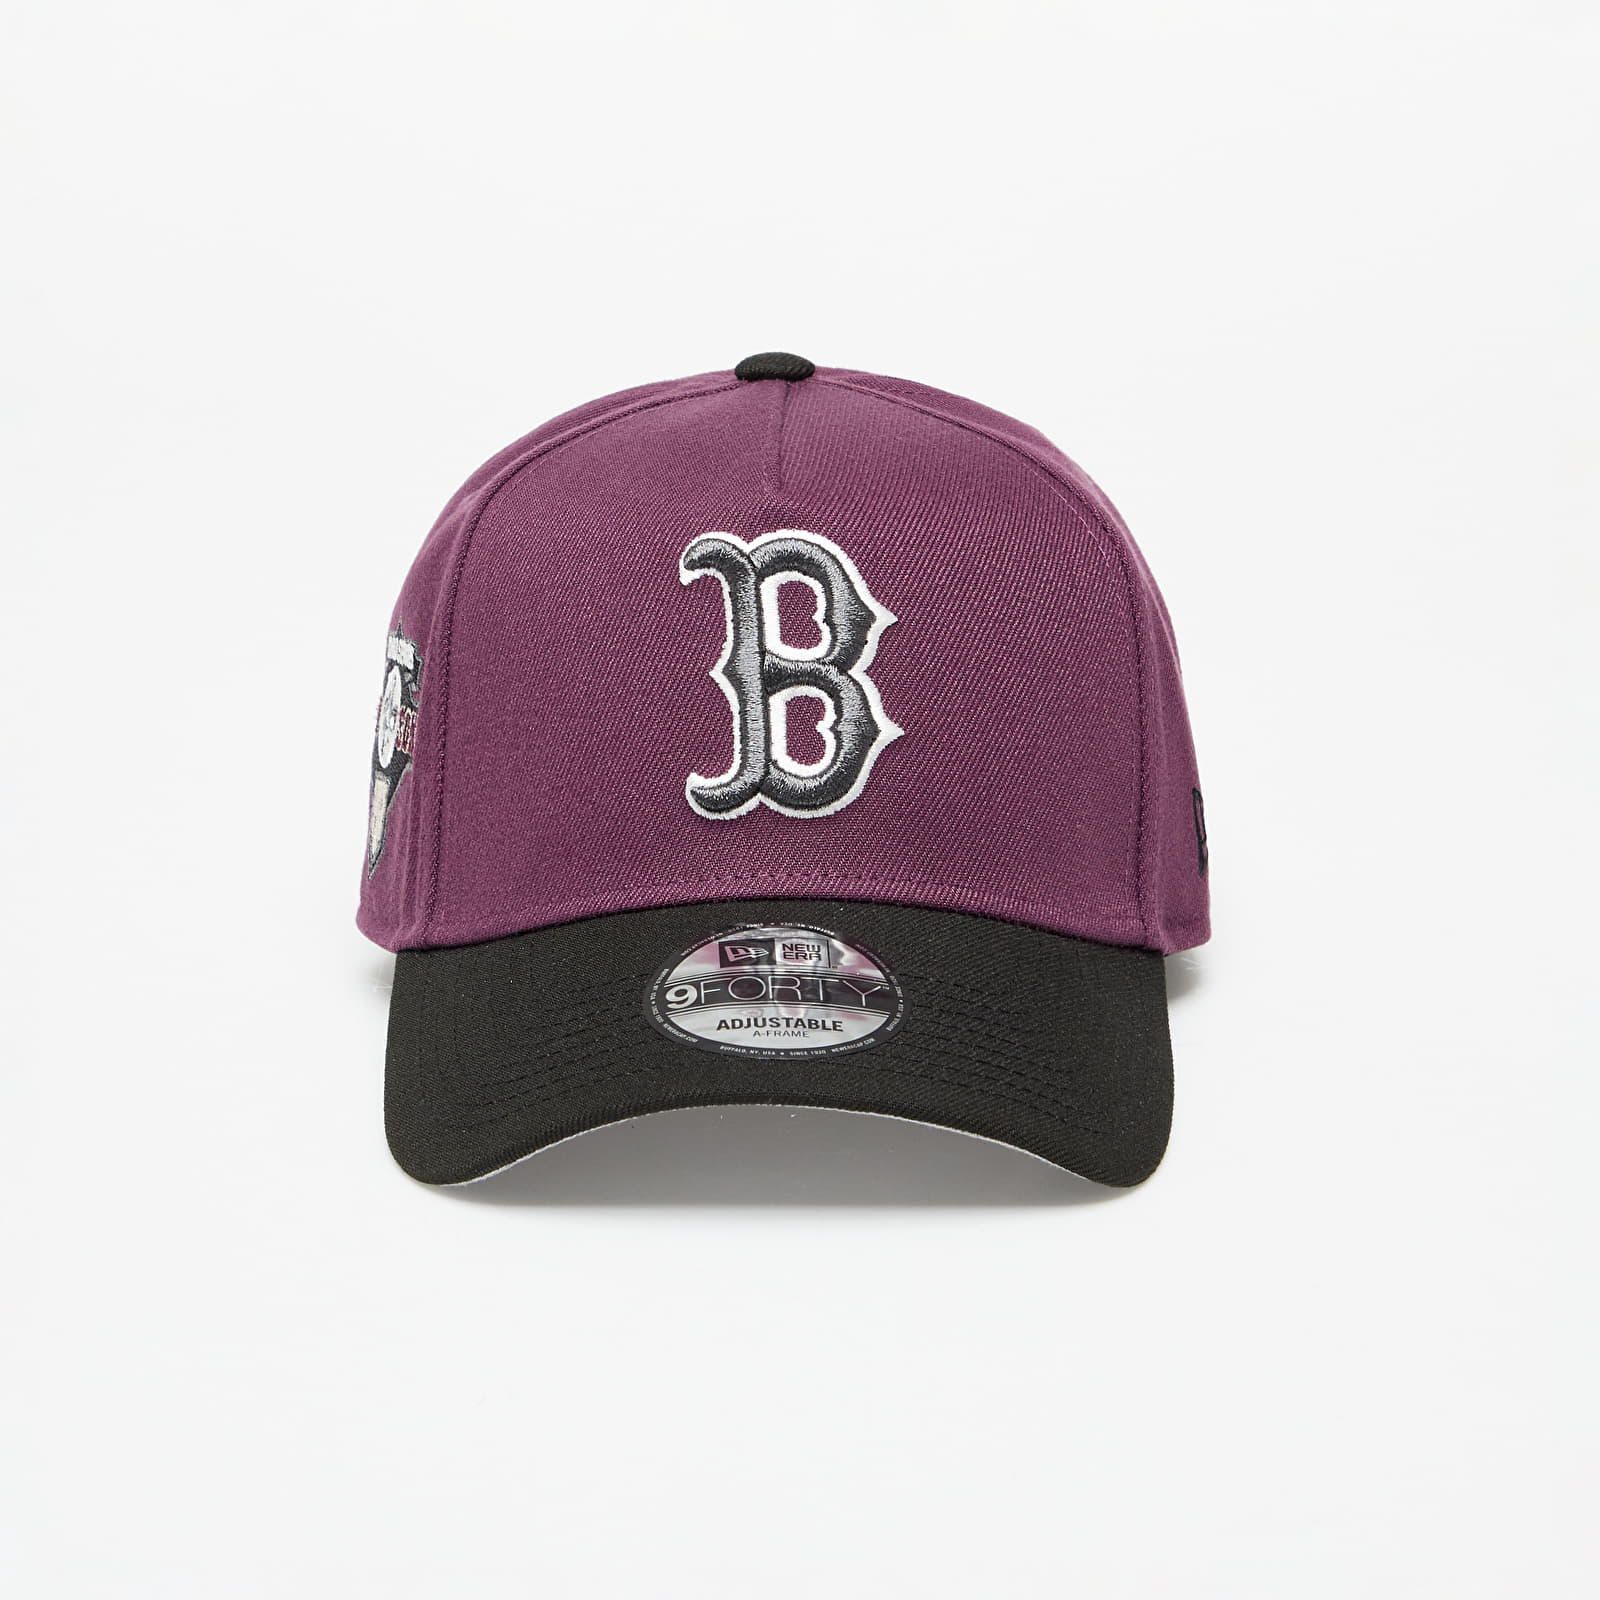 Șepci New Era Boston Red Sox Two-Tone A-Frame 9FORTY Adjustable Cap Dark Purple